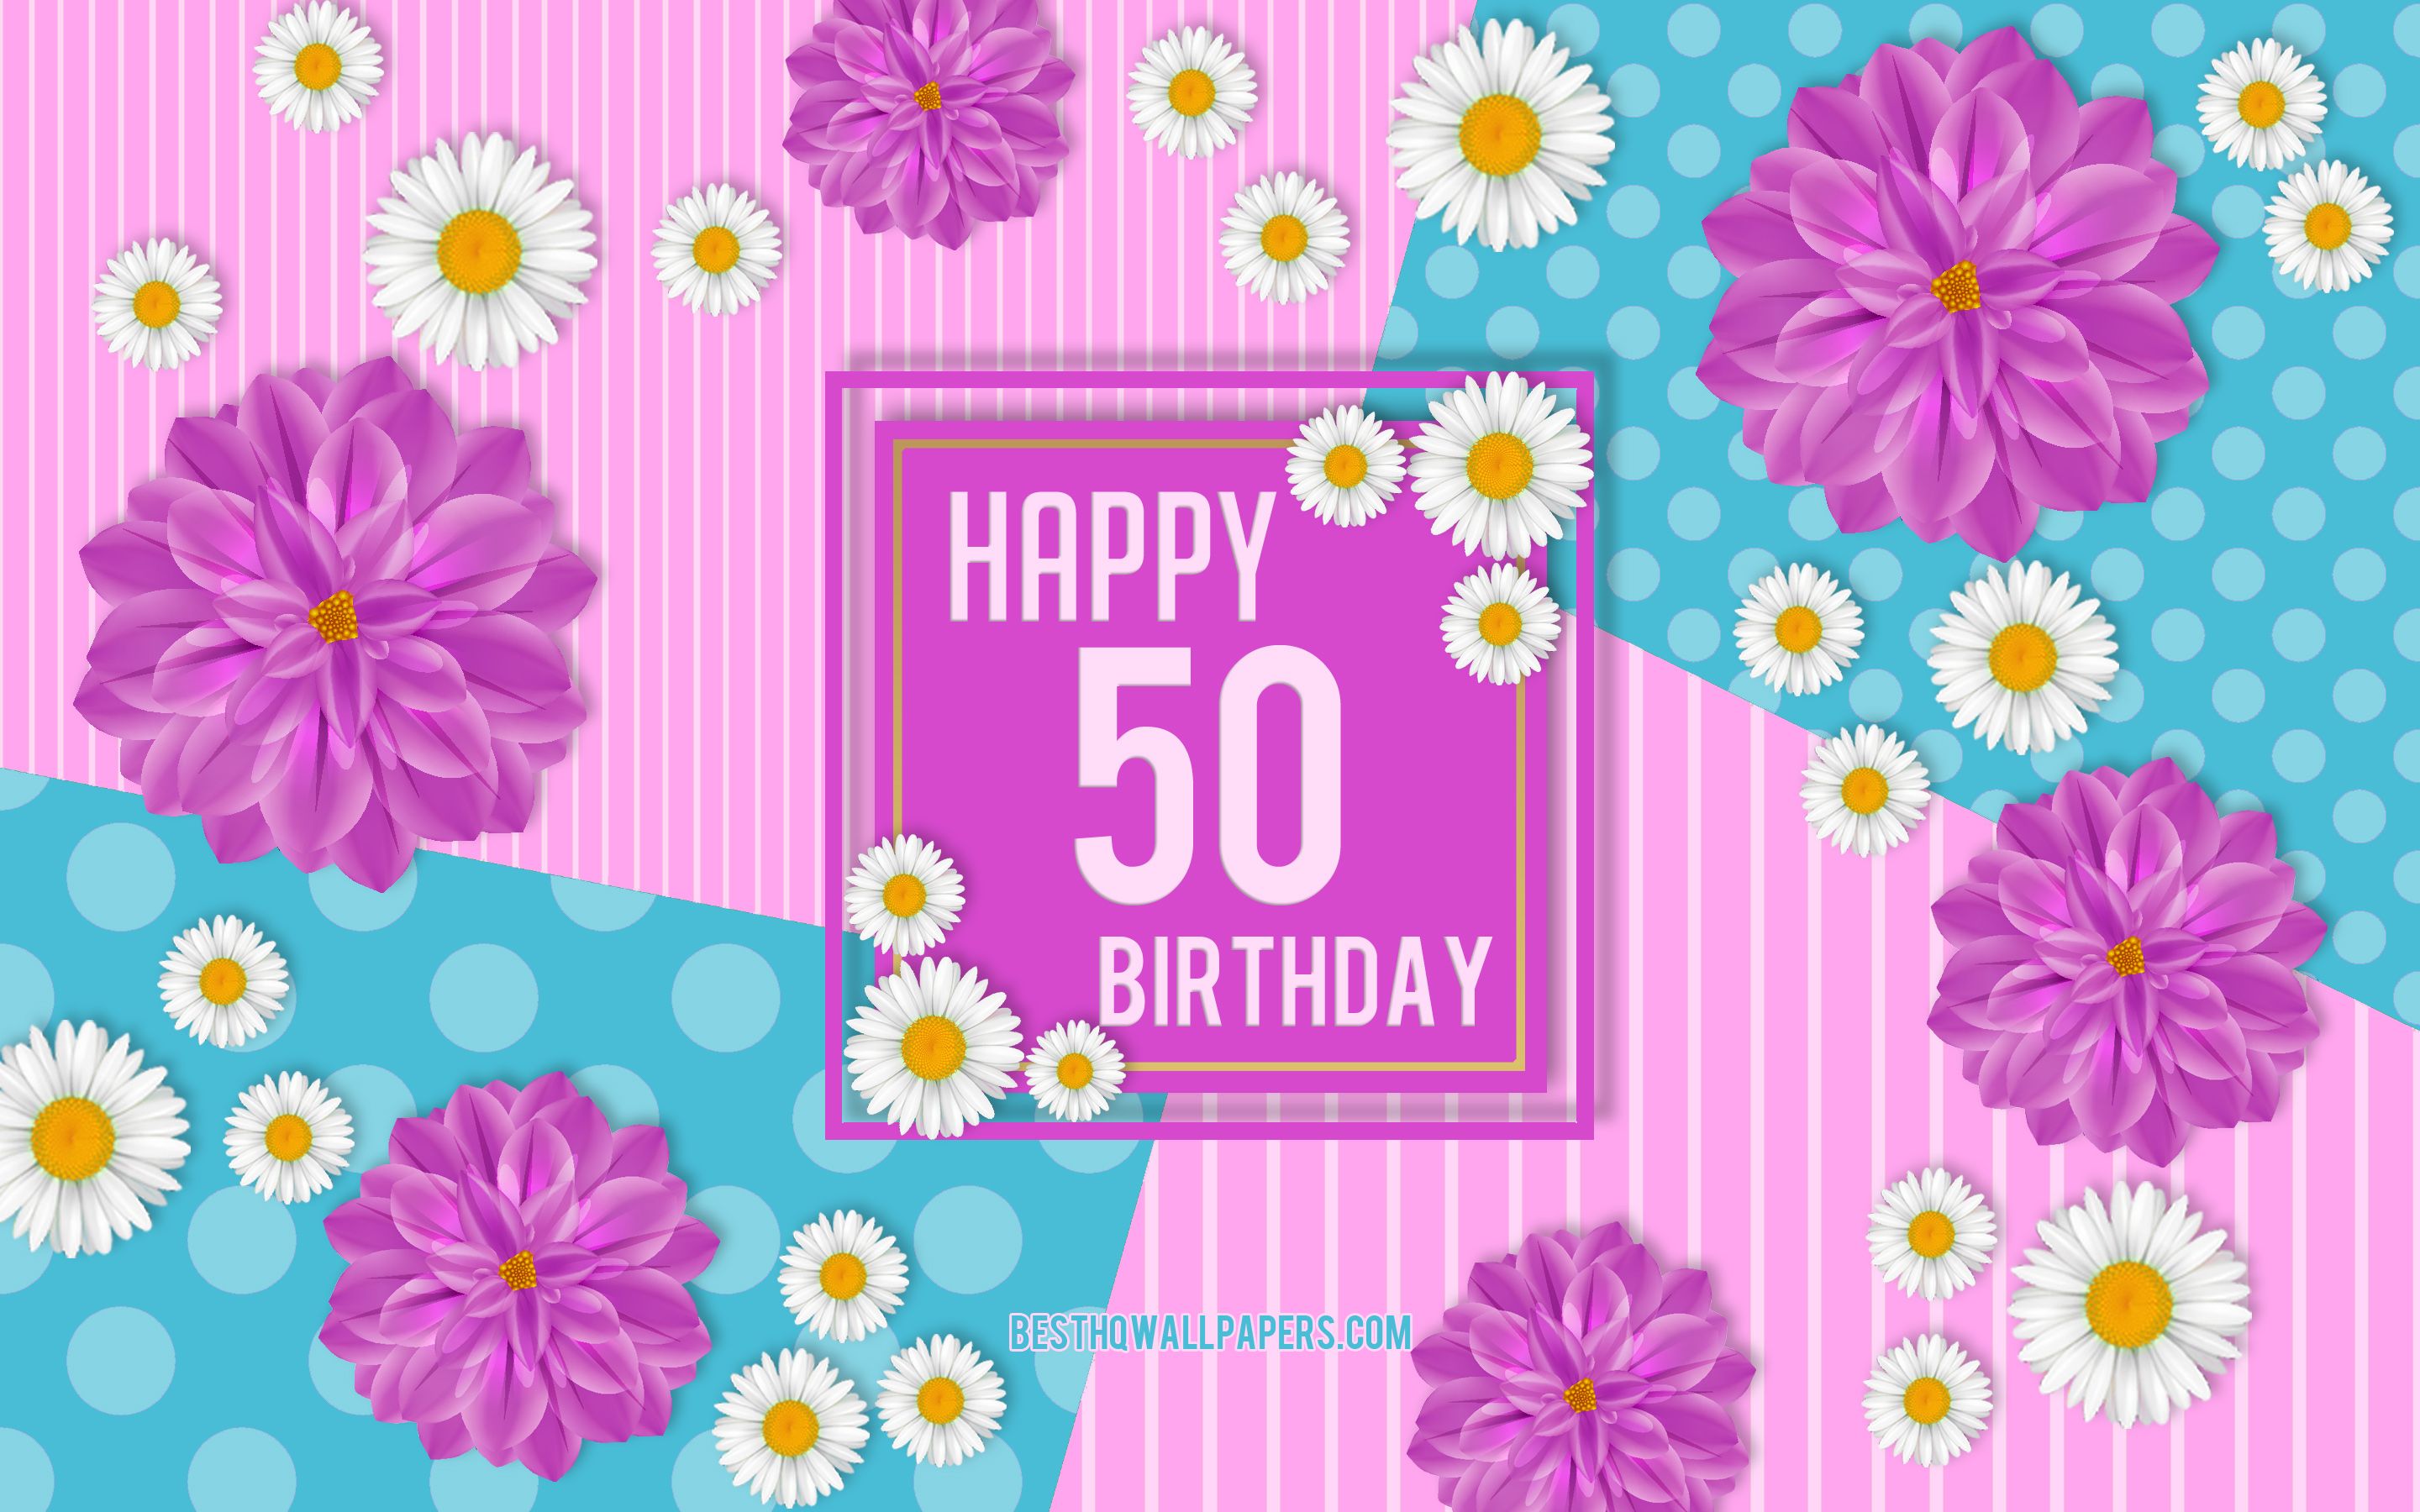 Download wallpaper 50th Happy Birthday, Spring Birthday Background, Happy 50th Birthday, Happy 50 Years Birthday, Birthday flowers background, 50 Years Birthday, 50 Years Birthday party for desktop with resolution 2880x1800. High Quality